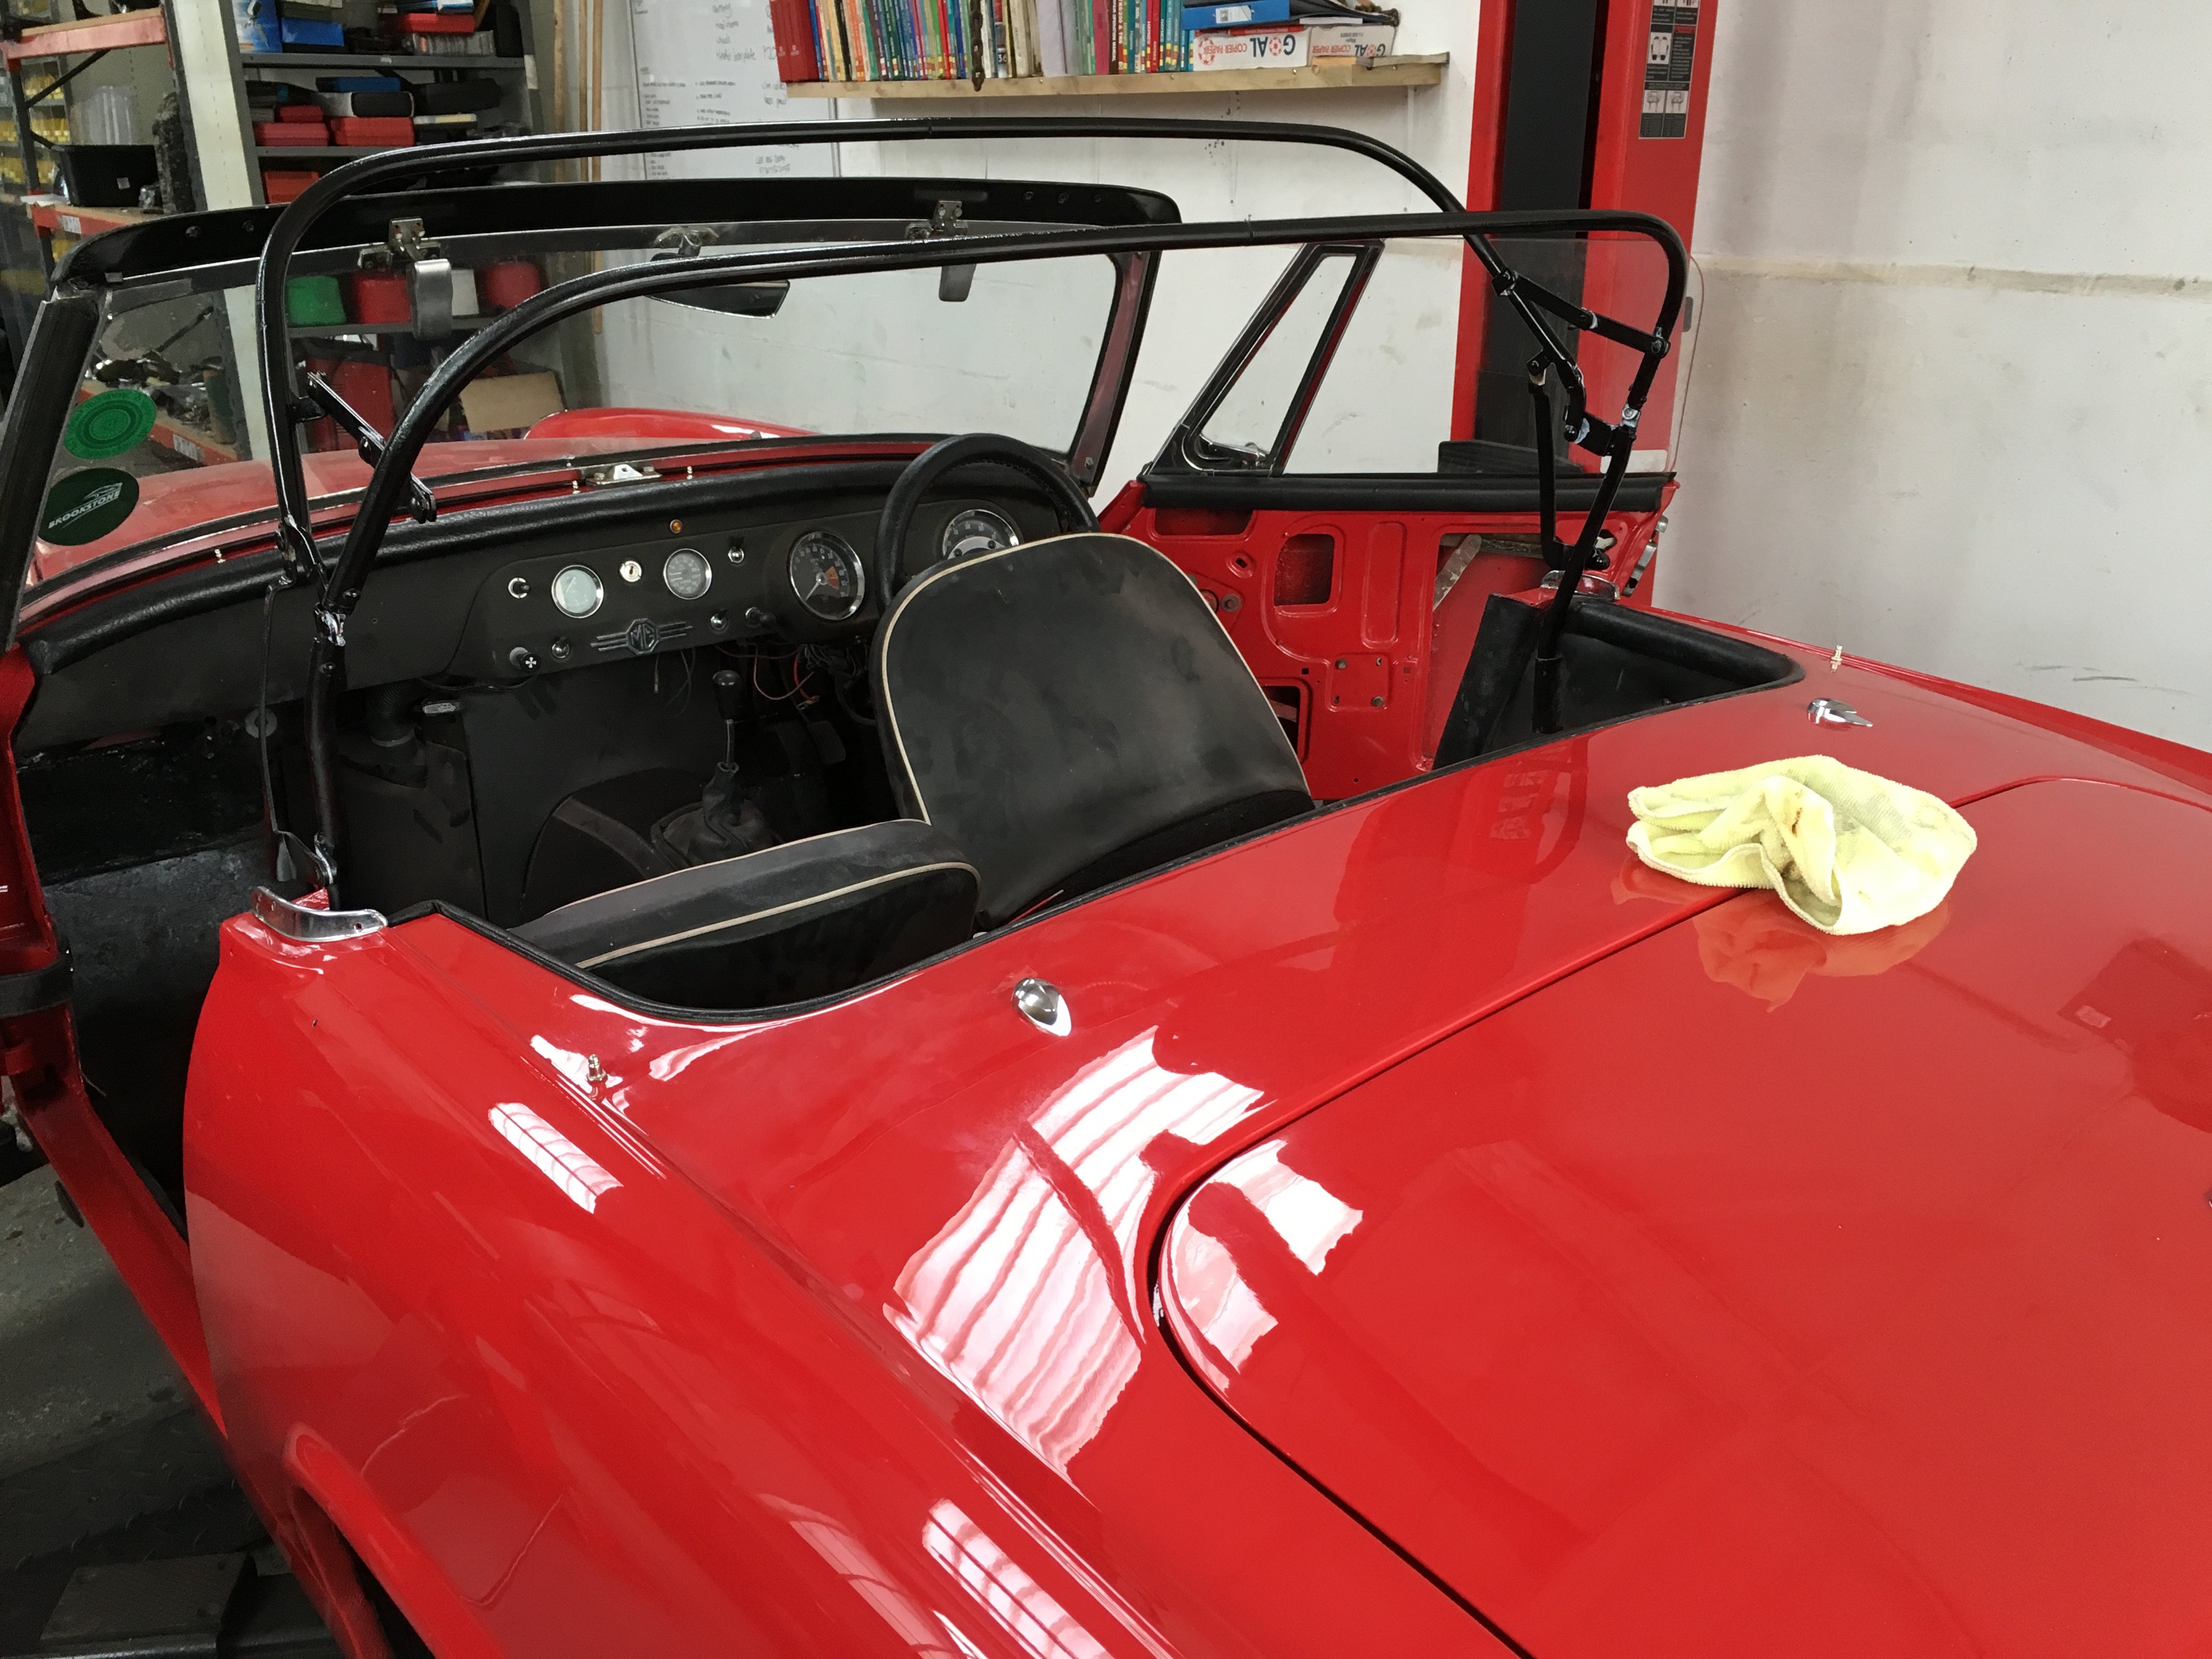 1966 MG Midget - Fitting the roof